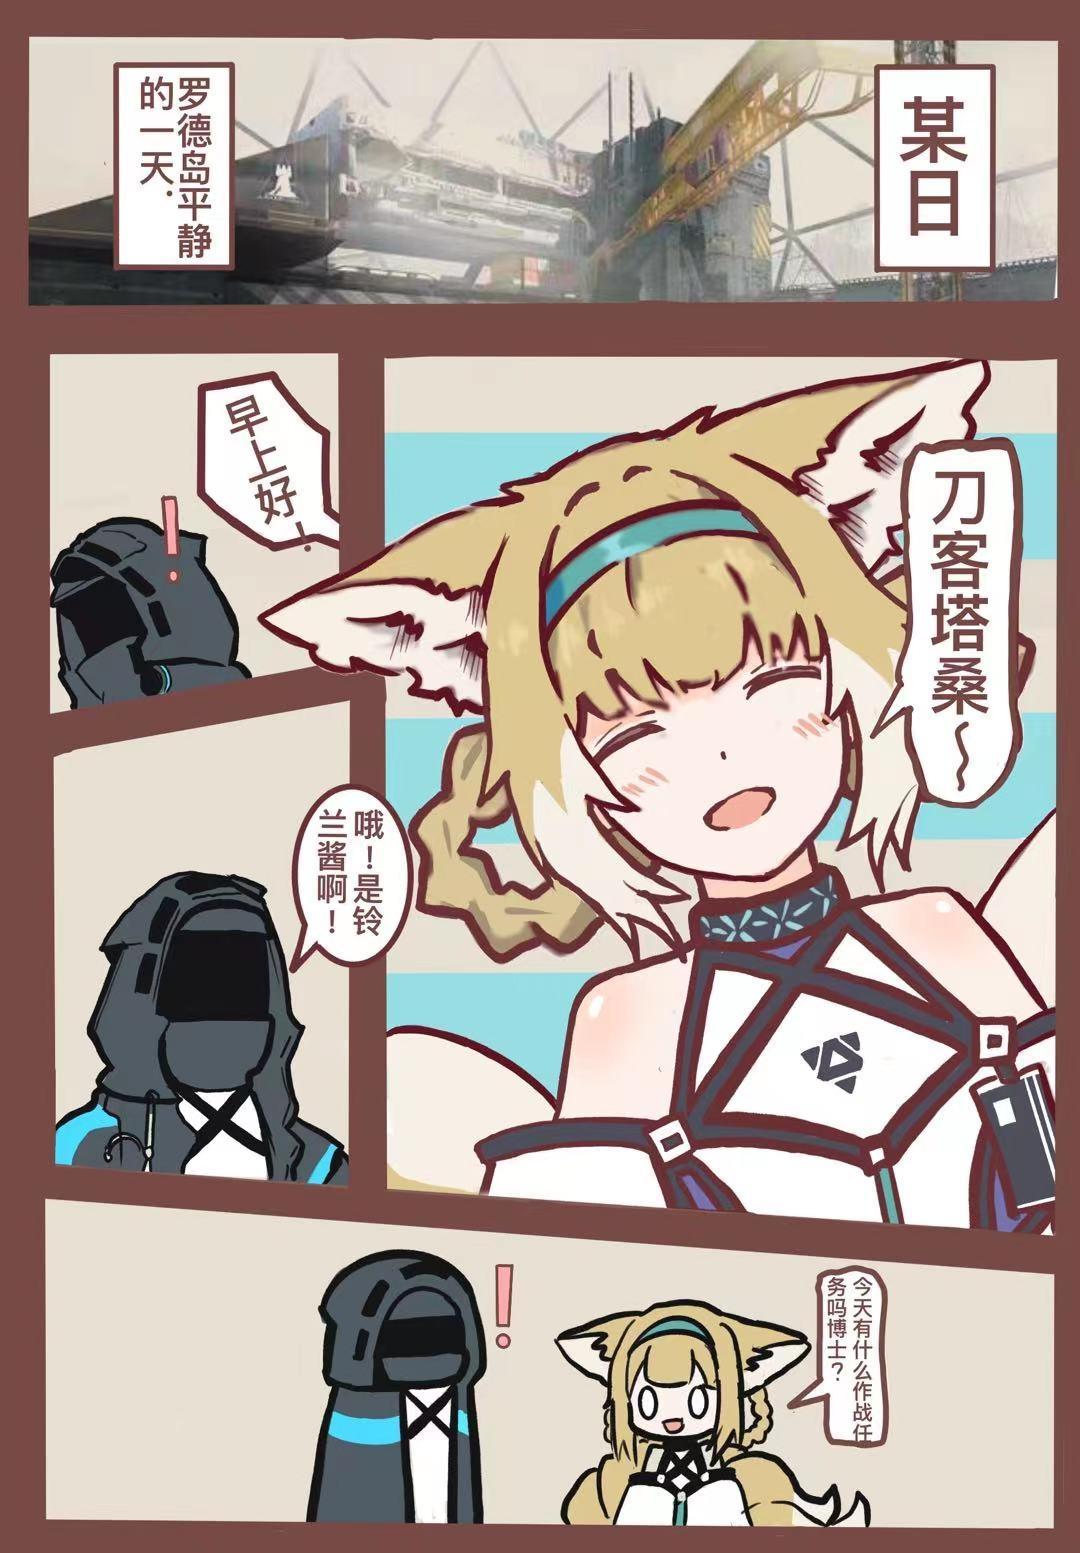 Punished 铃兰の单人作战记录 - Arknights Gayfuck - Picture 2